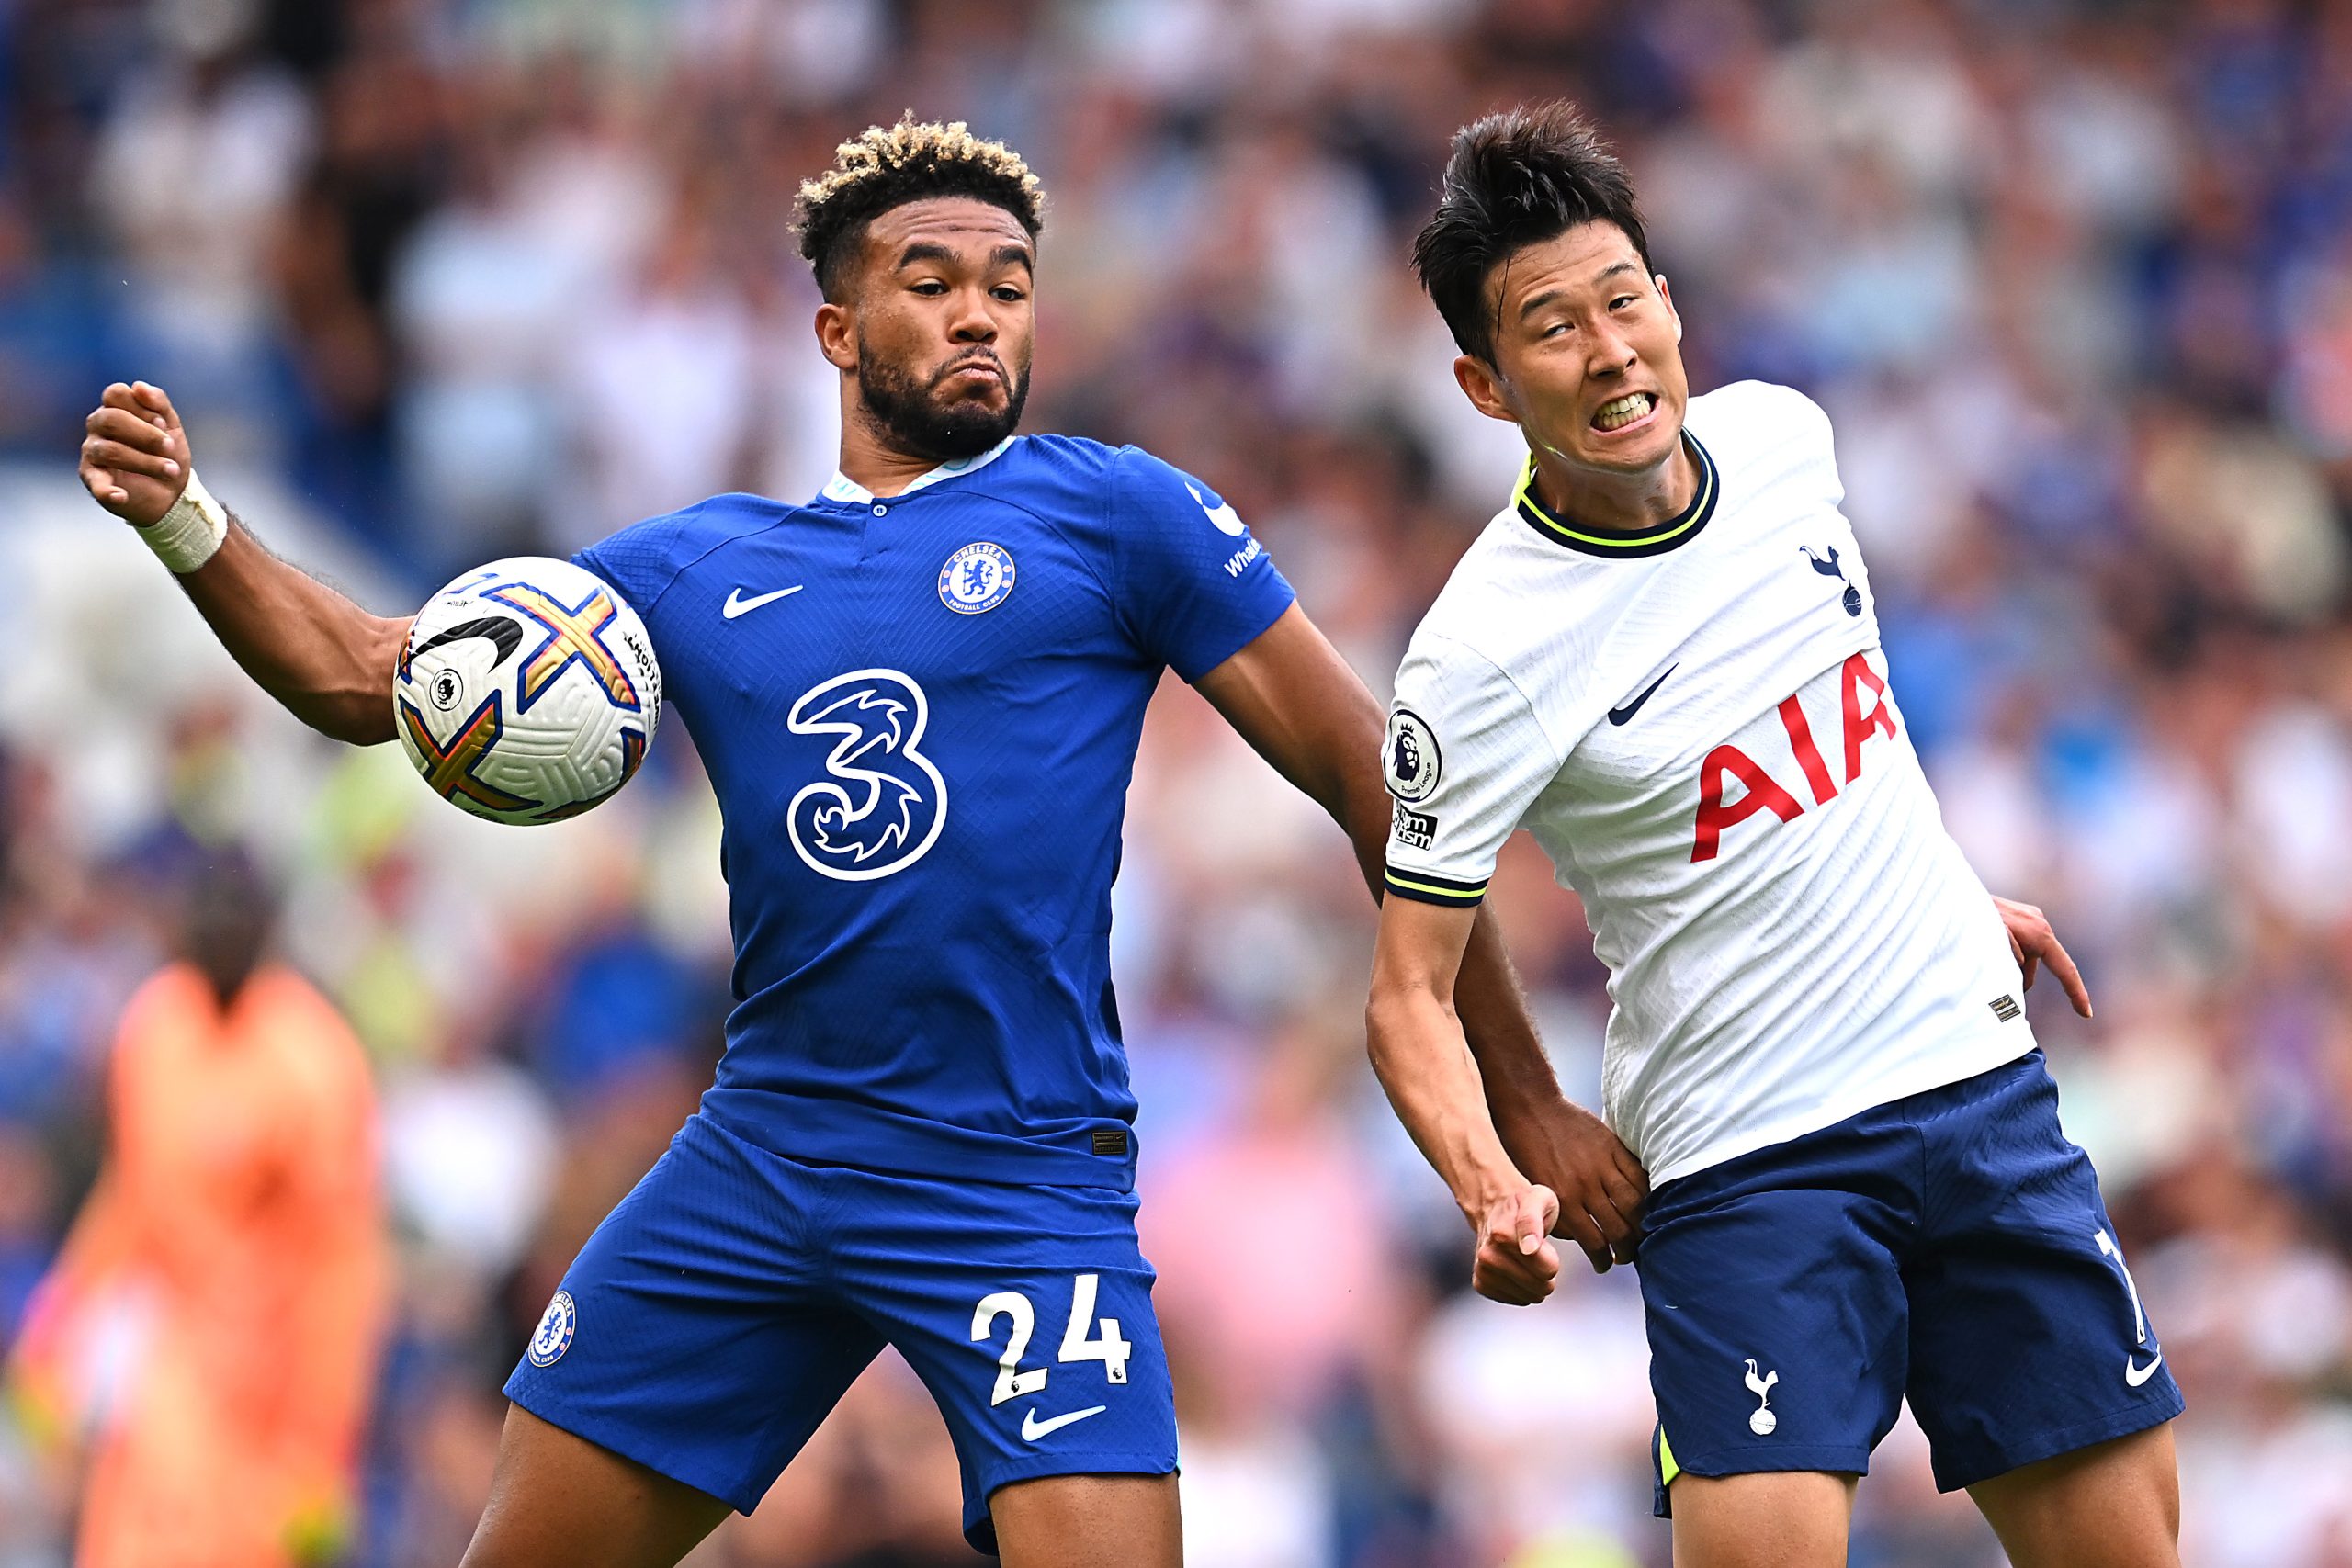 Chelsea expect Reece James to return to action against Fulham.